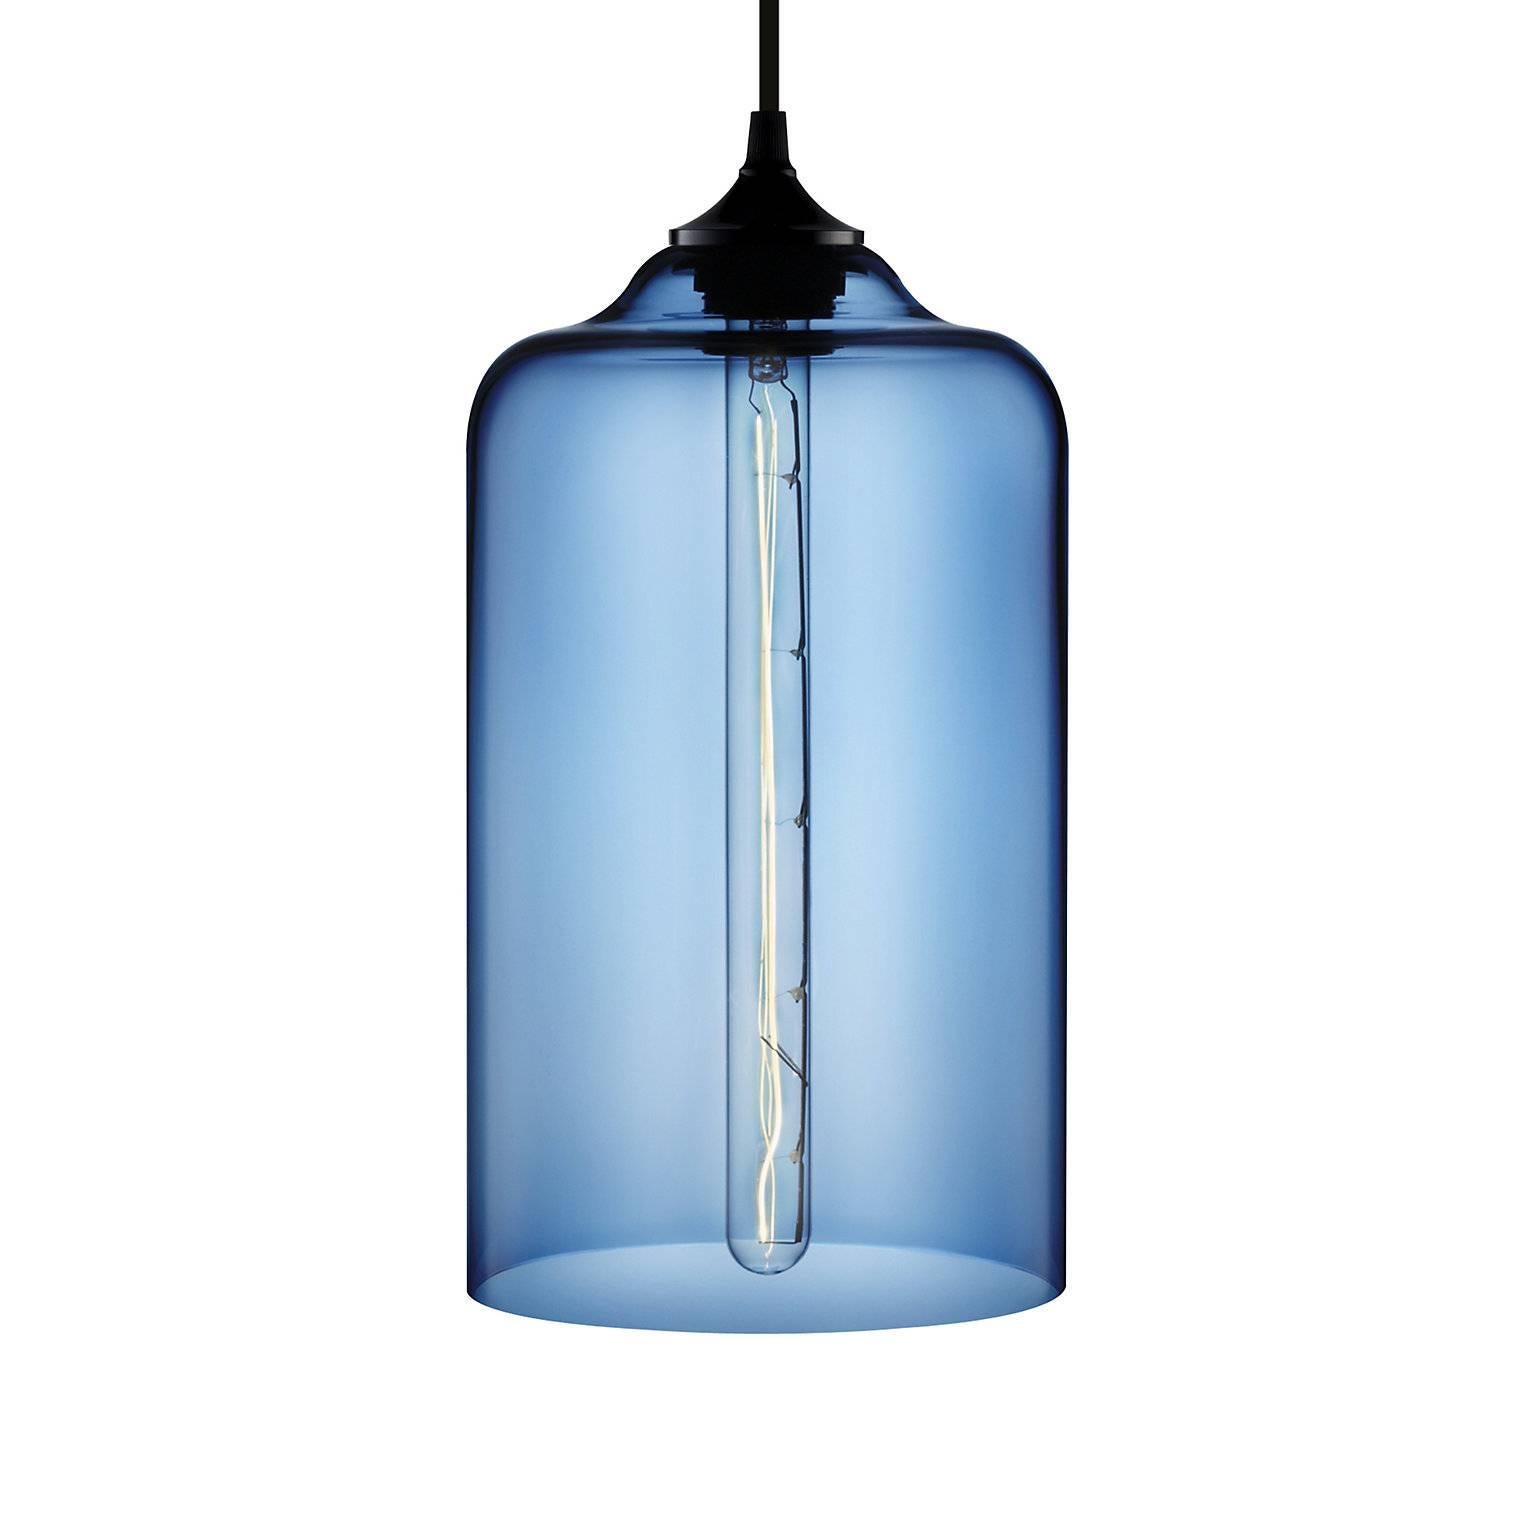 Bella Plum Handblown Modern Glass Pendant Light, Made in the USA In New Condition For Sale In Beacon, NY